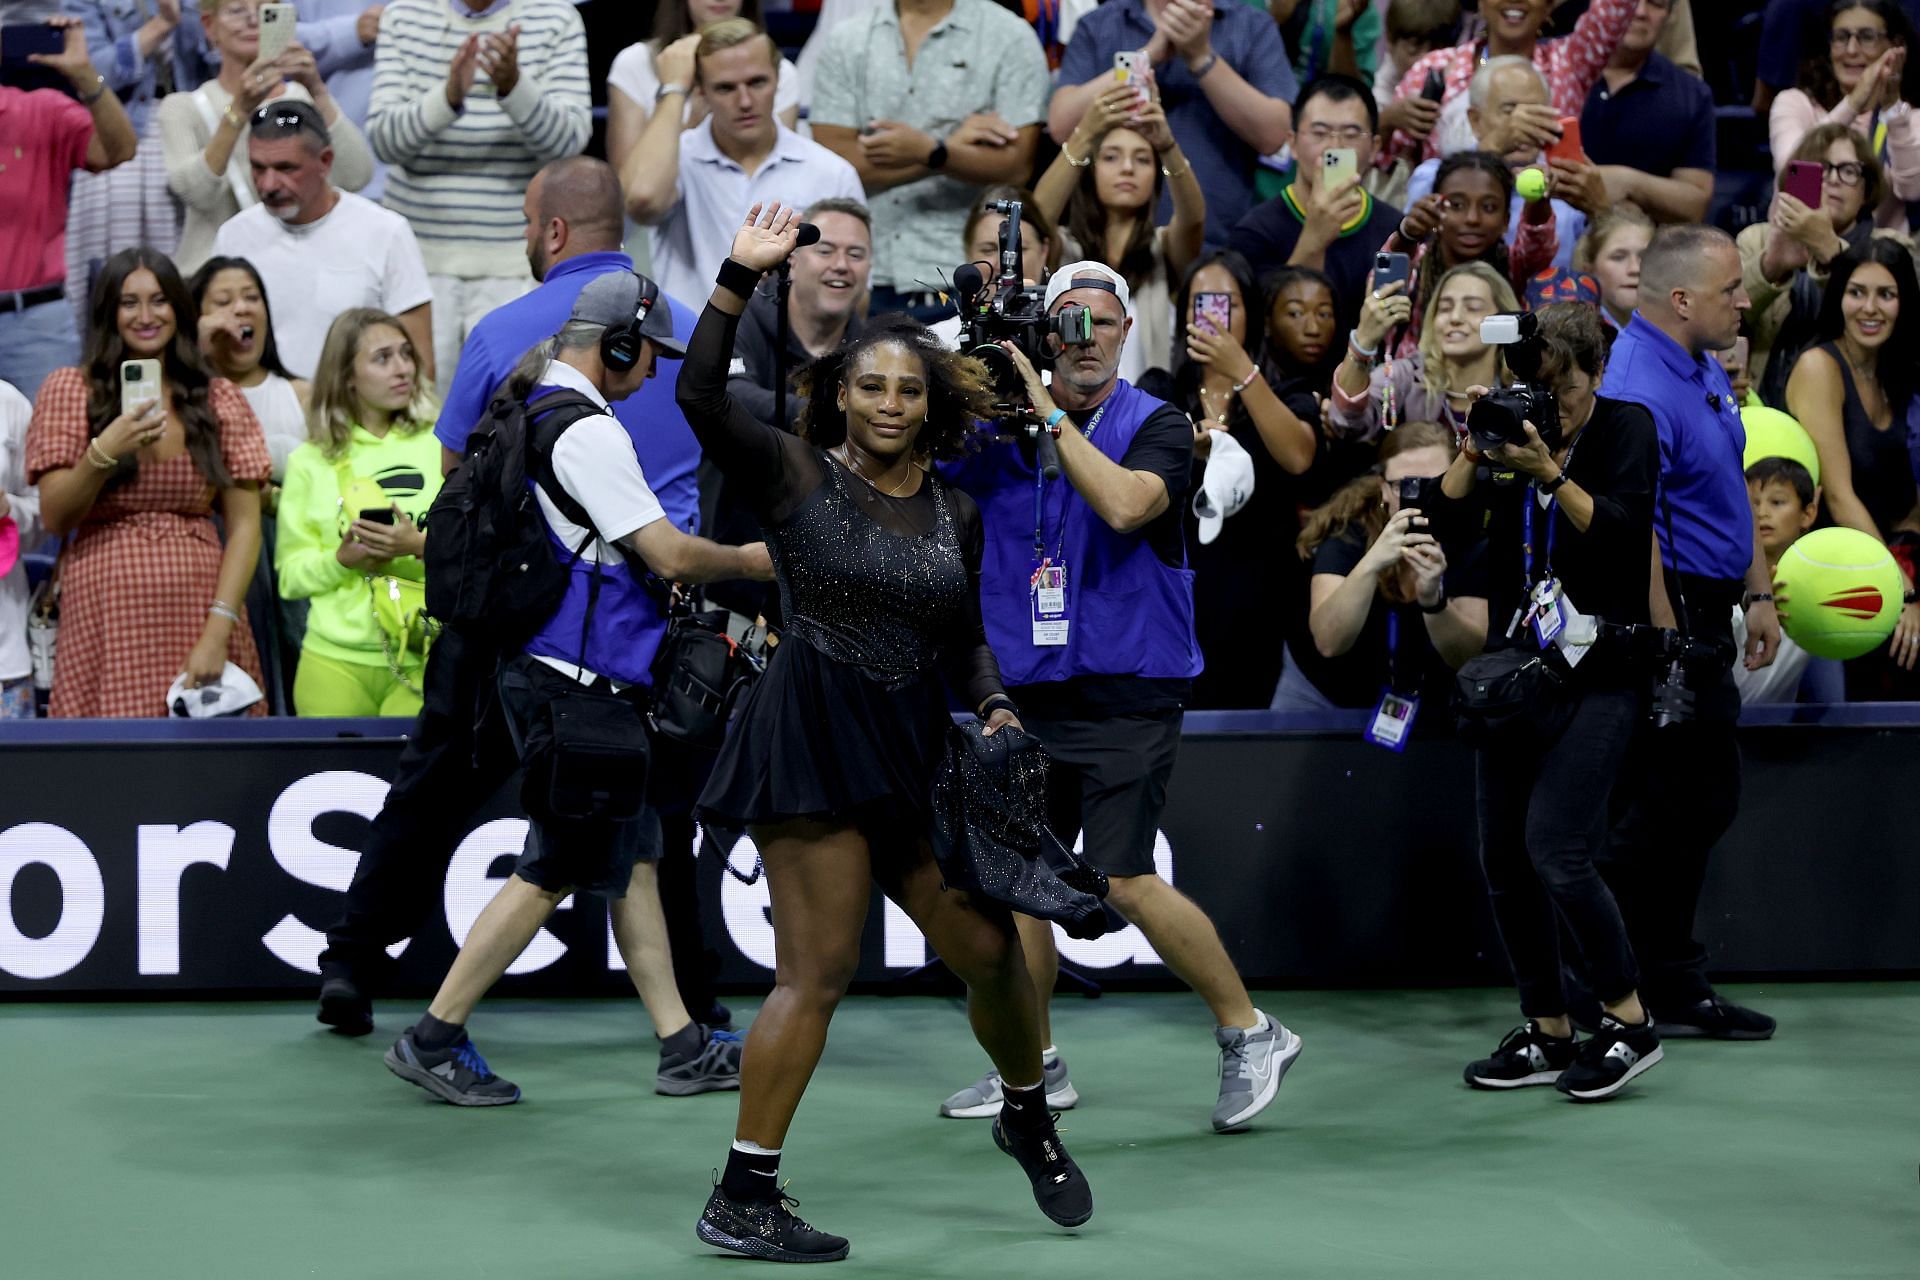 Serena Williams thanks the fans after being defeated by Ajla Tomlijanovic at the 2022 US Open - Day 5